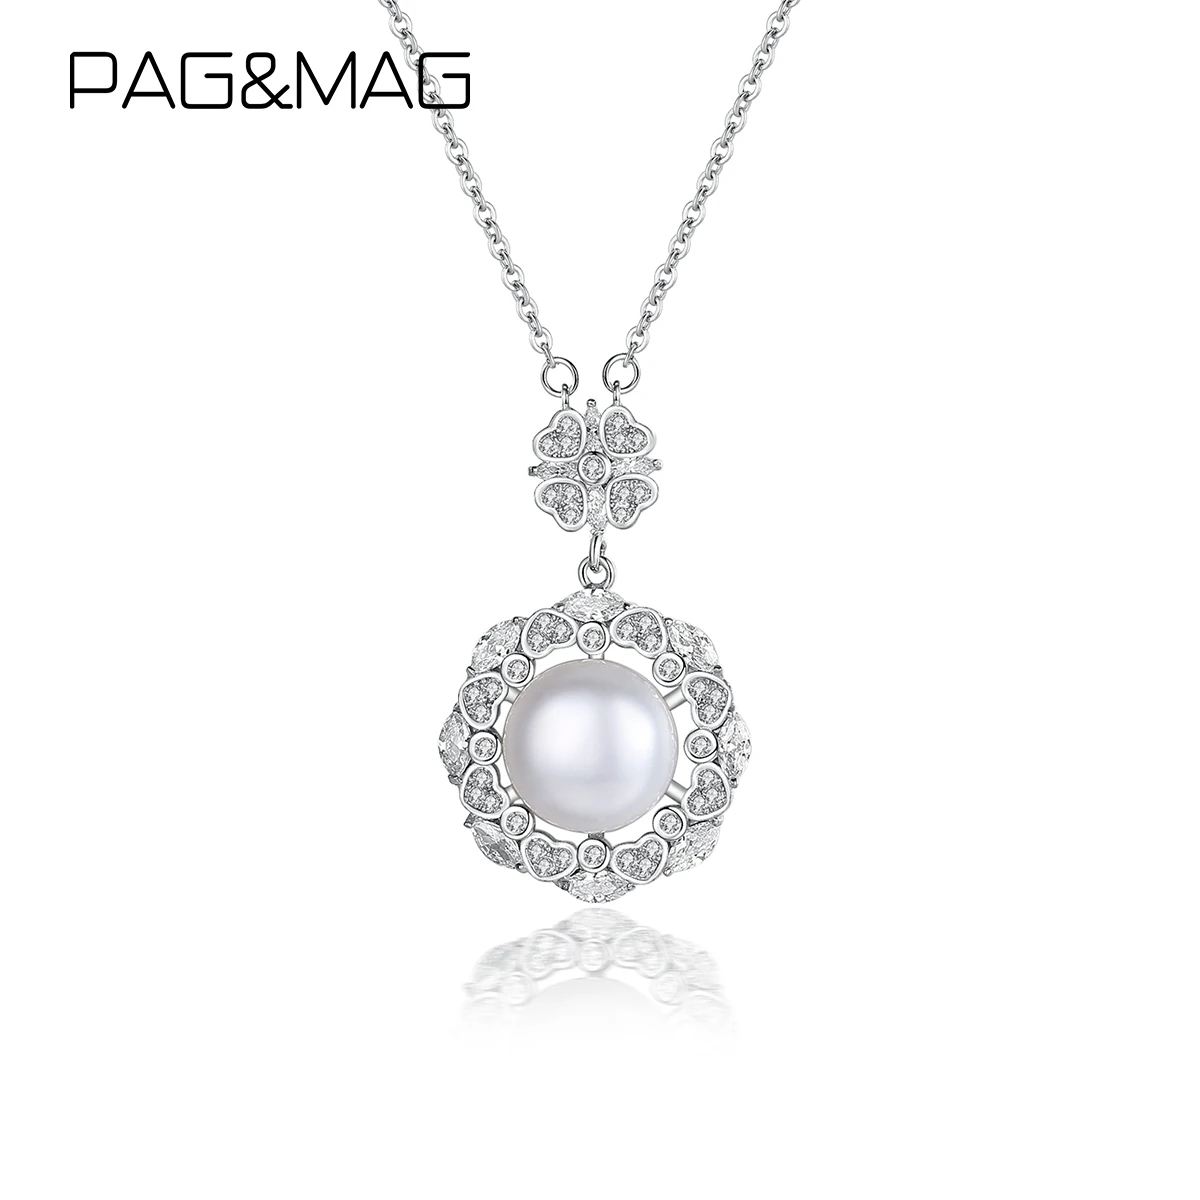 

PAG&MAG Charm Luxury Pendant Jewelry Lady Woman 2021 Trending Zircon Flower Shape Fresh Water Pearl Necklace